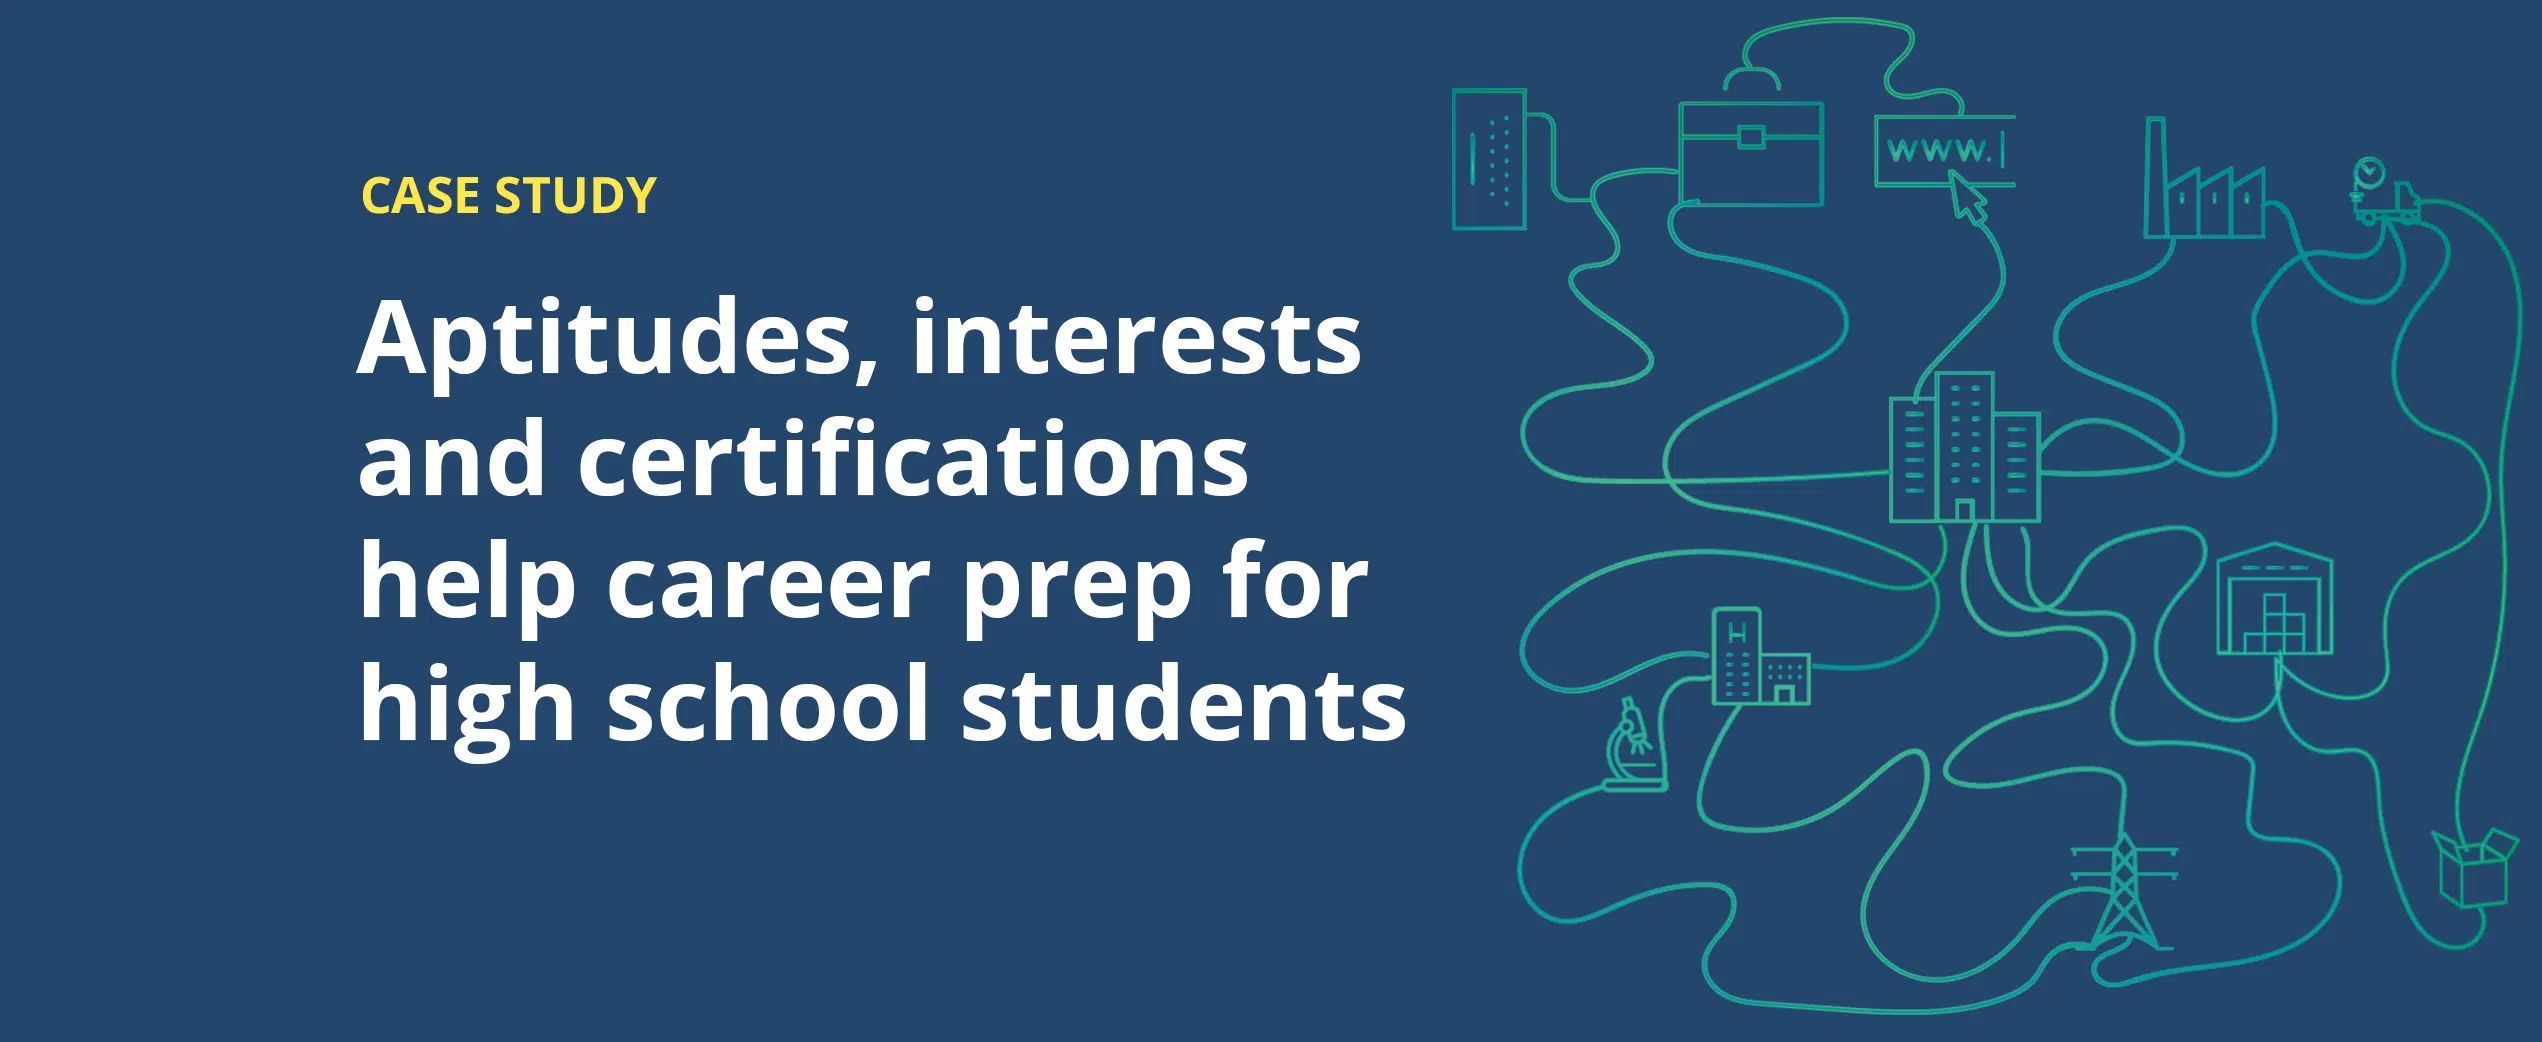 Aptitudes, interests and certifications help career prep for high school students.